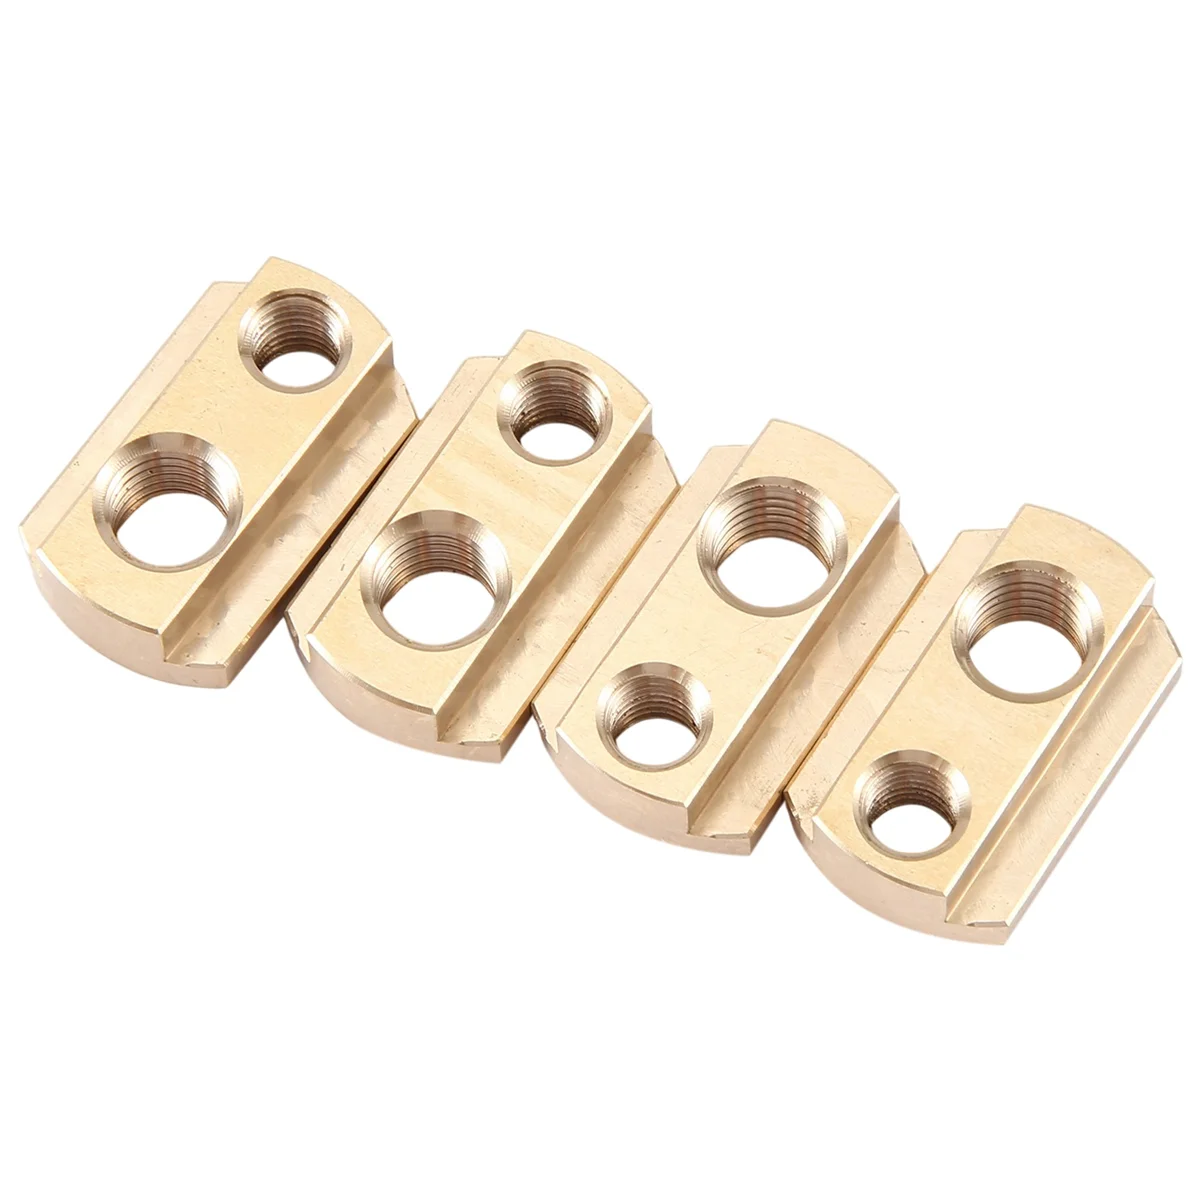 

4 PCS Sliding T Nuts with Machine Rice Screw Hydrofoil Mounting T-Nuts M6 and M8 for All Hydrofoil Tracks